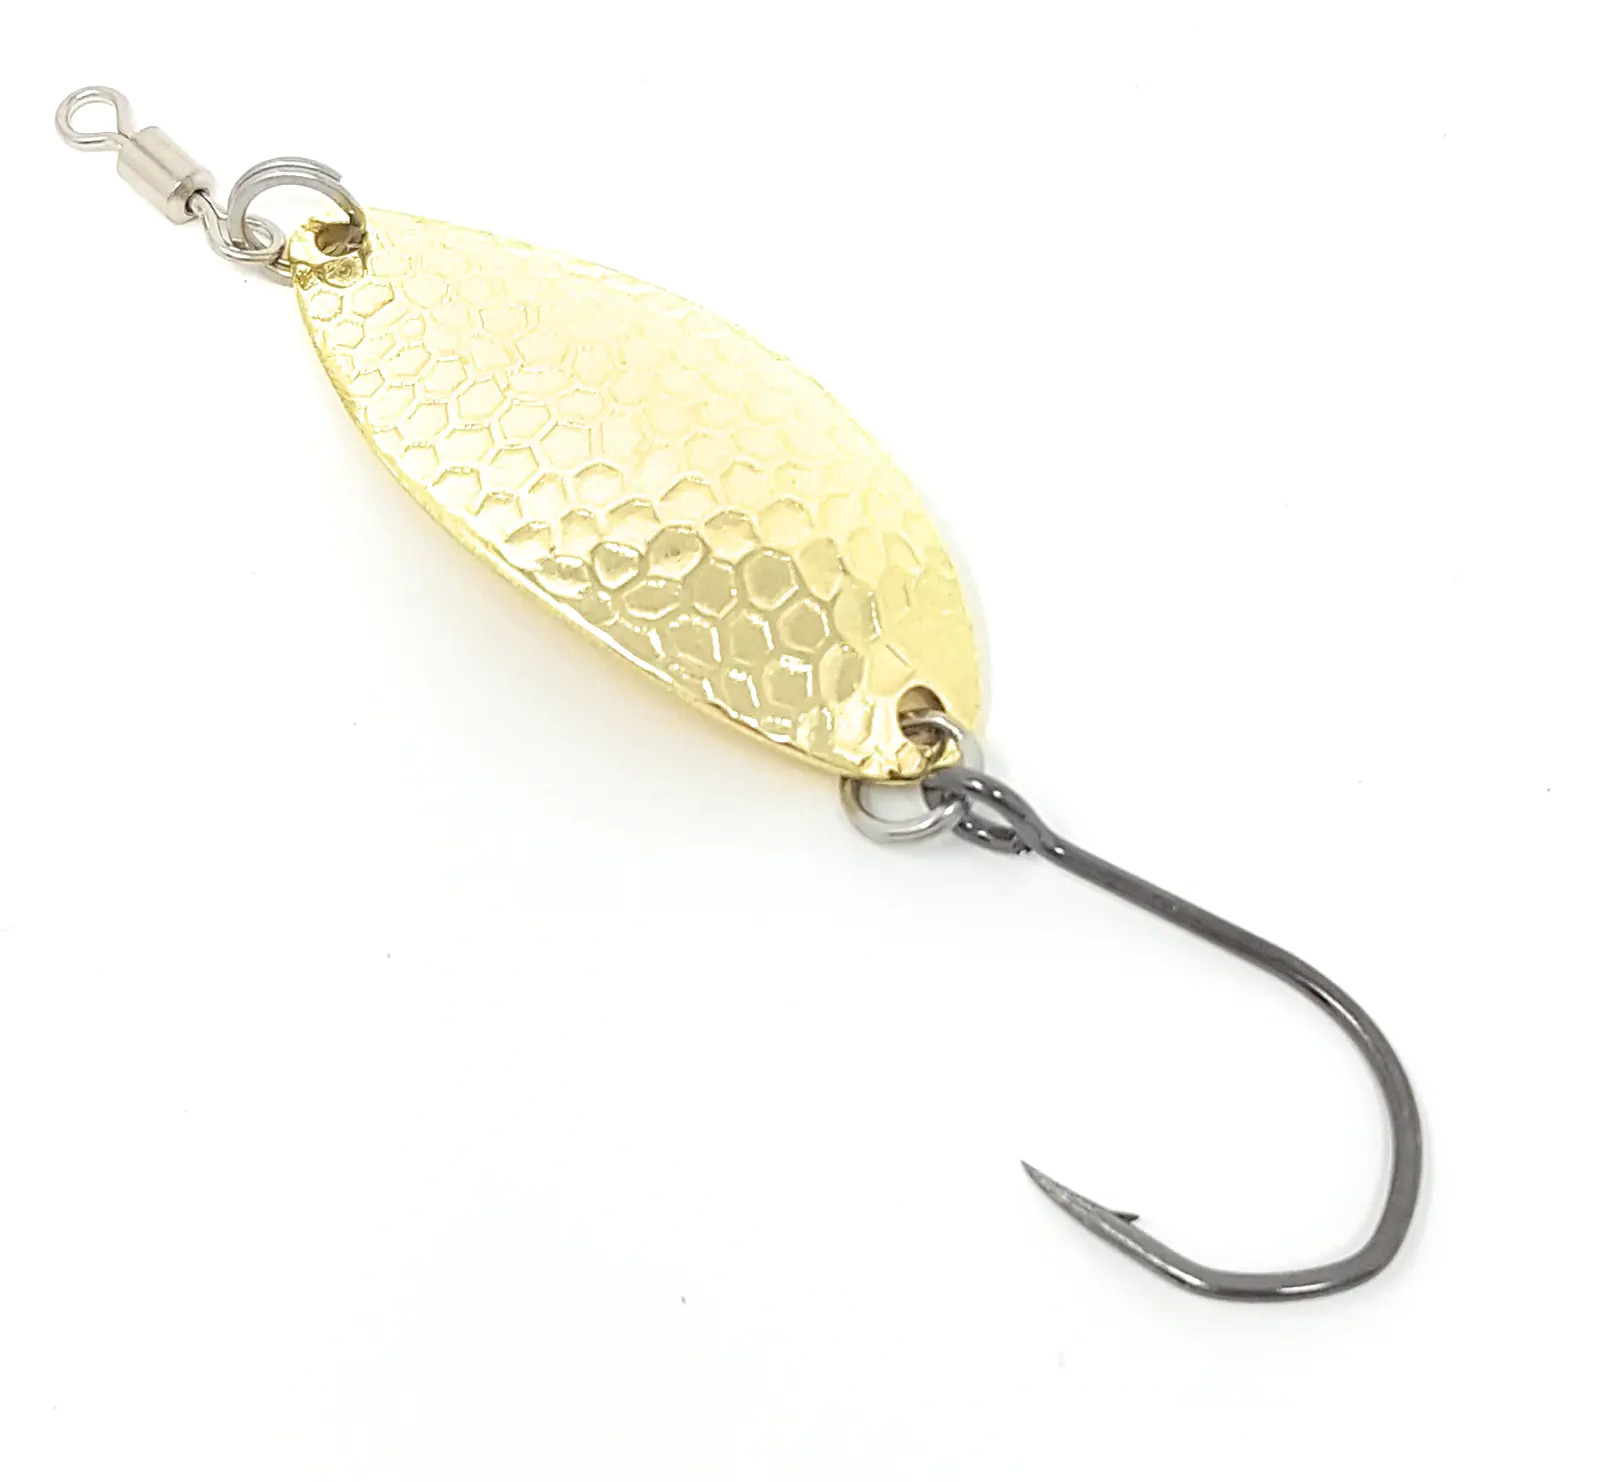 Prime Lures Glory Spoons  Hatch Match'r Fly & Tackle